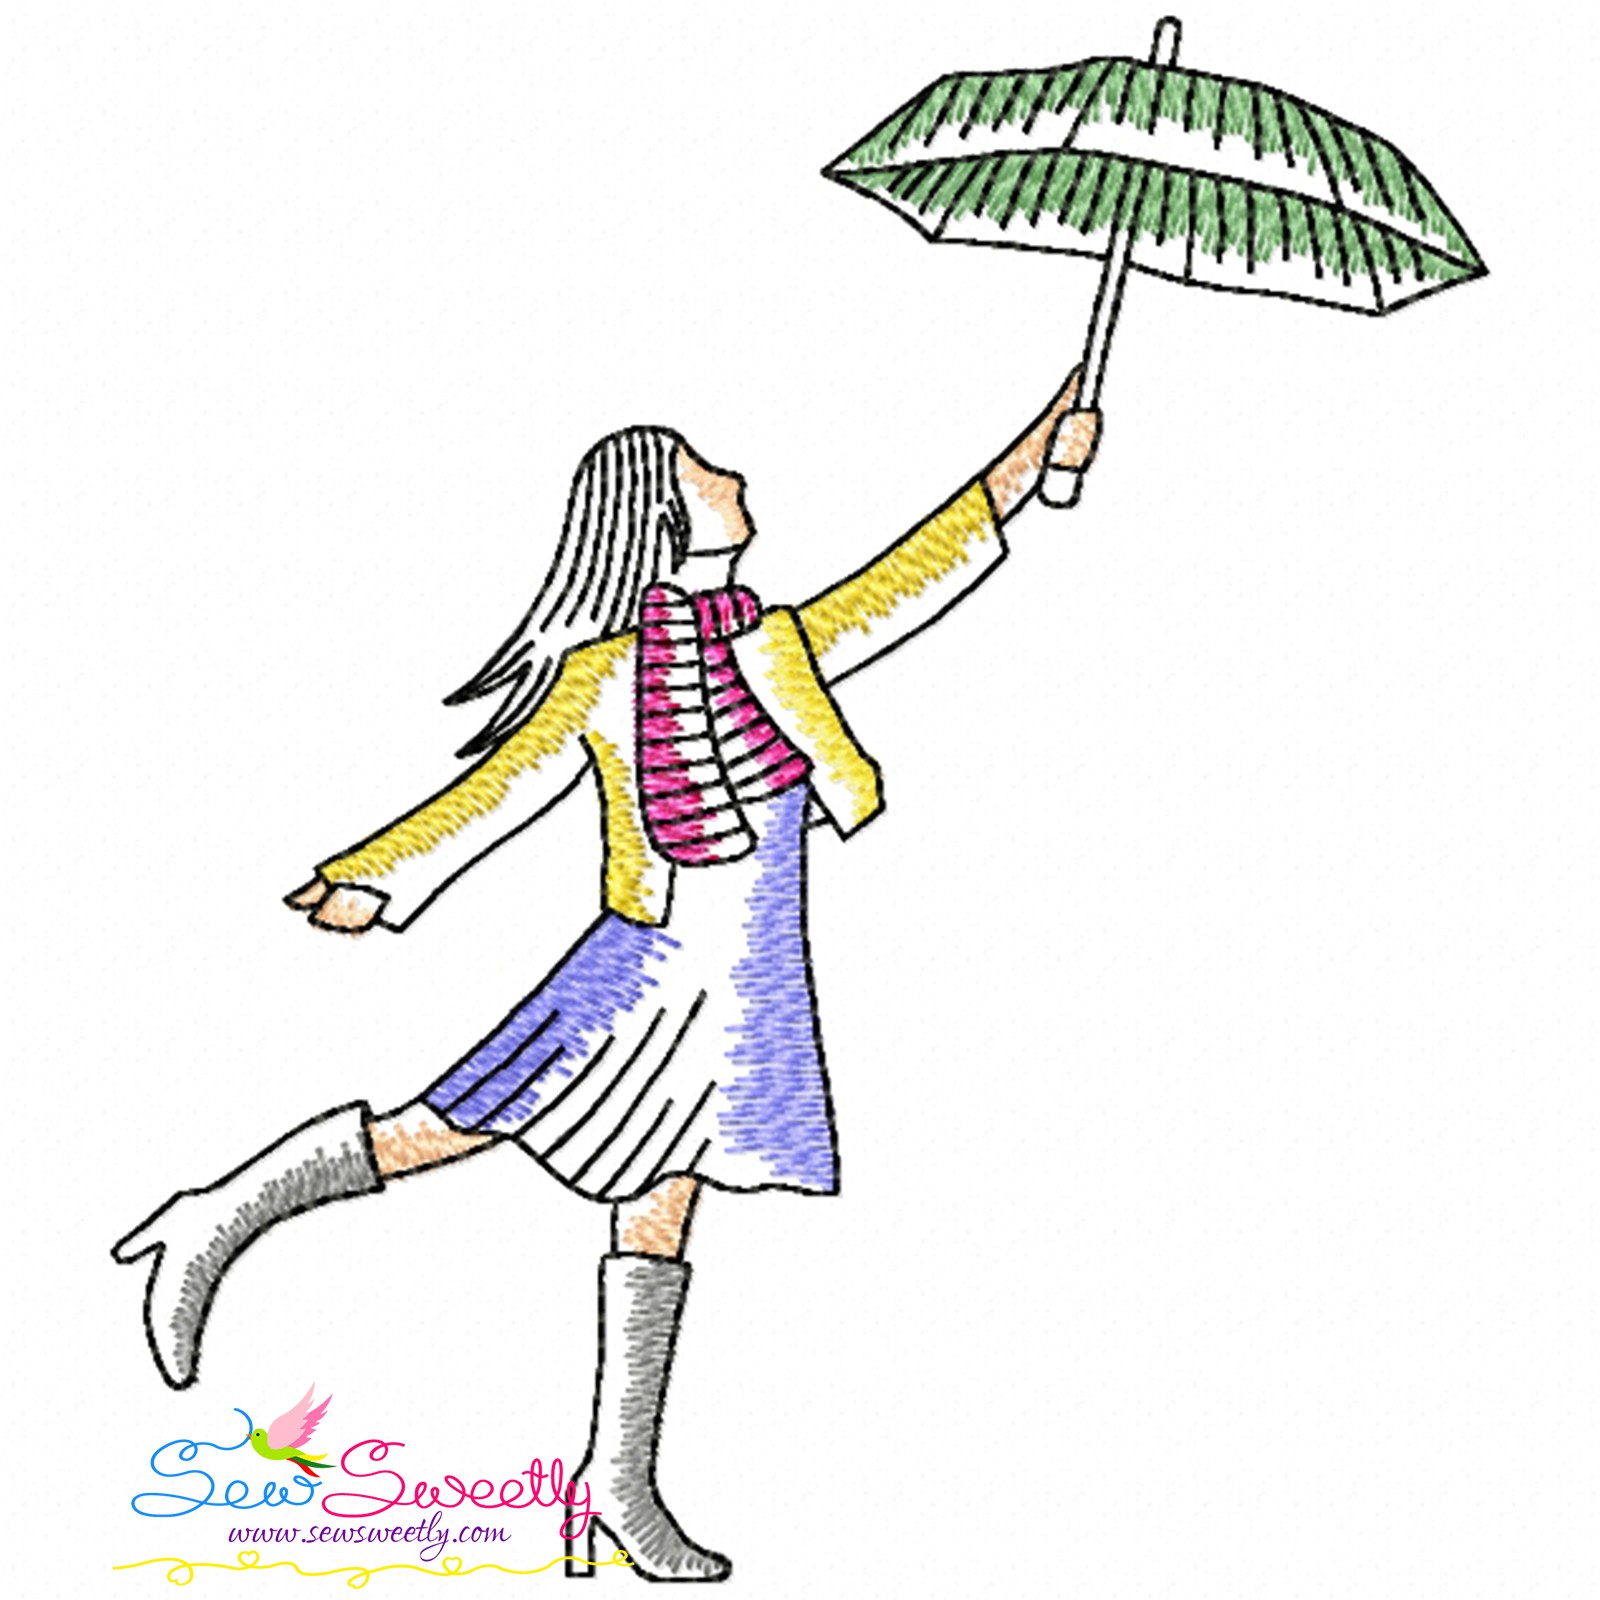 Umbrella Girl Stick Figure Line Drawing, Spring, Stick Figure, Line Drawing  PNG Transparent Image And Clipart Image For Free Download - Lovepik |  401712517